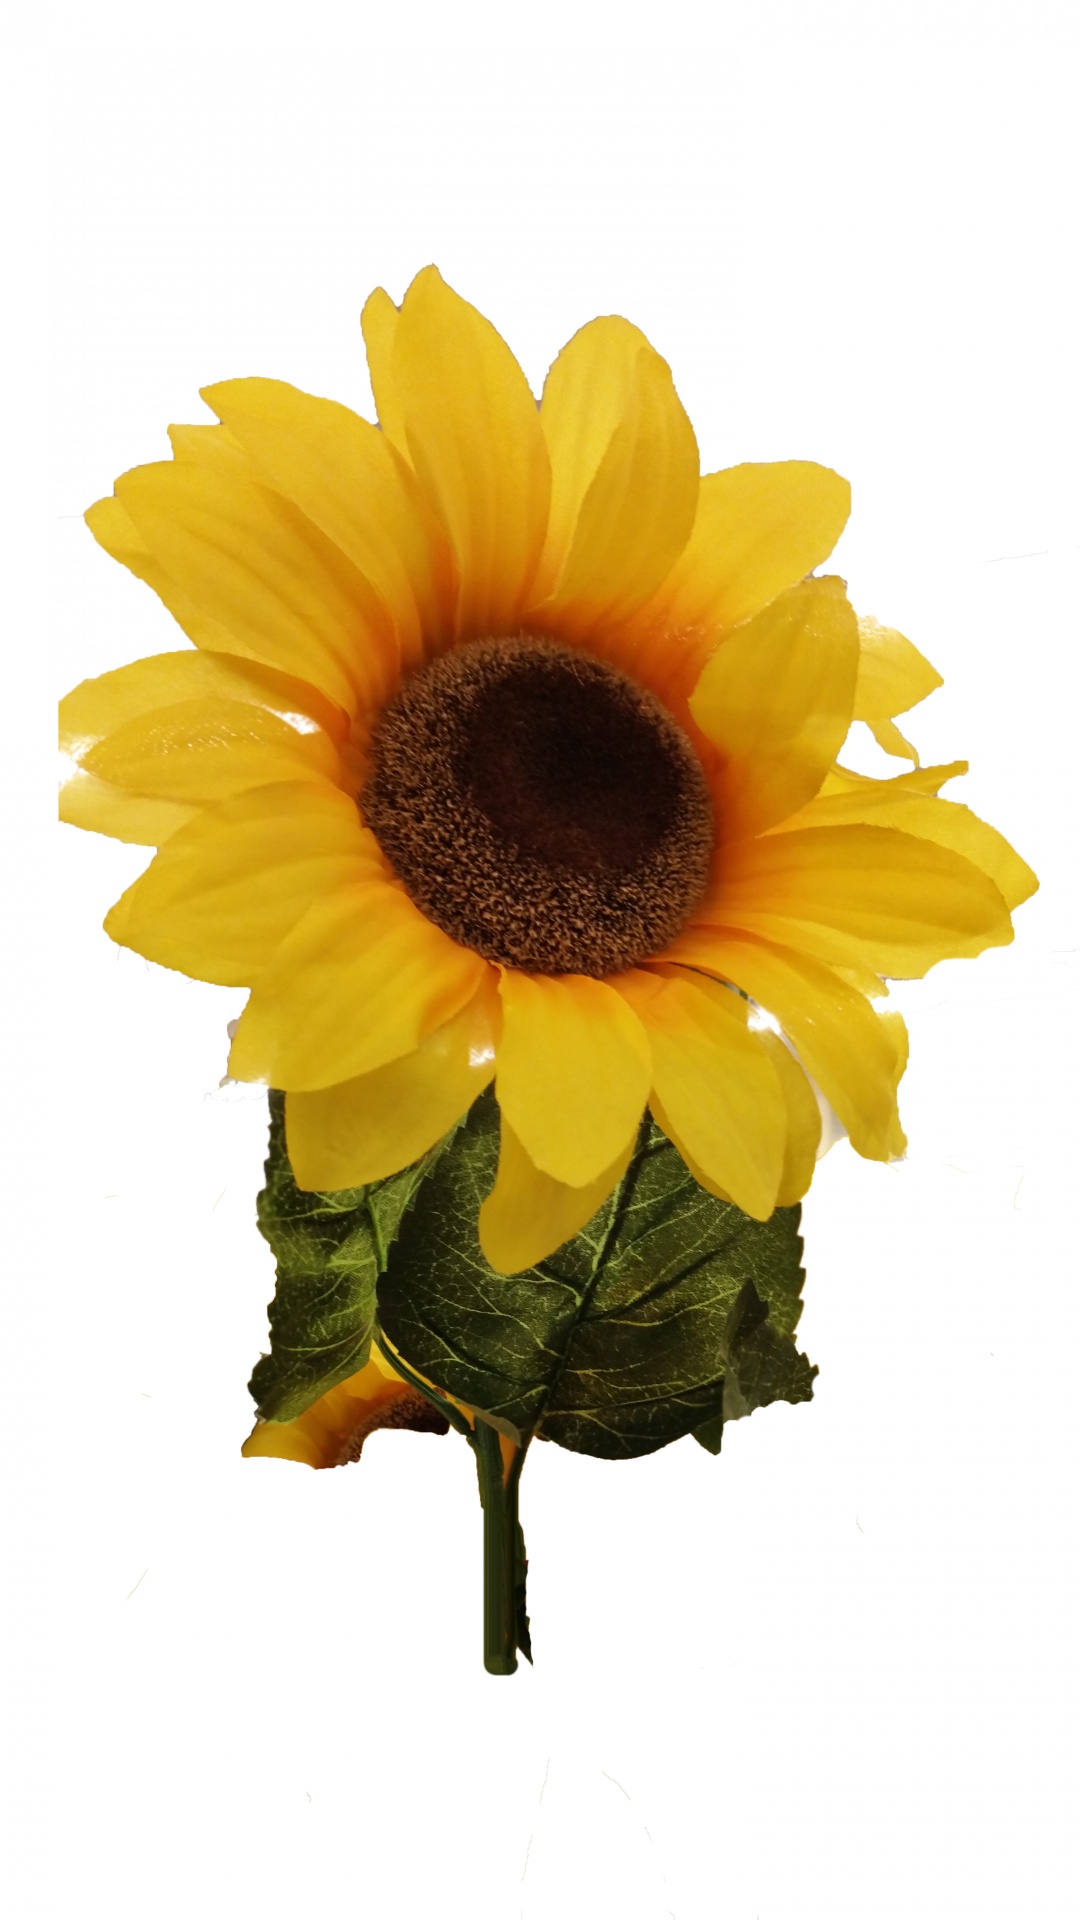 Sunflower On White Background Free Stock Photo - Public Domain Pictures